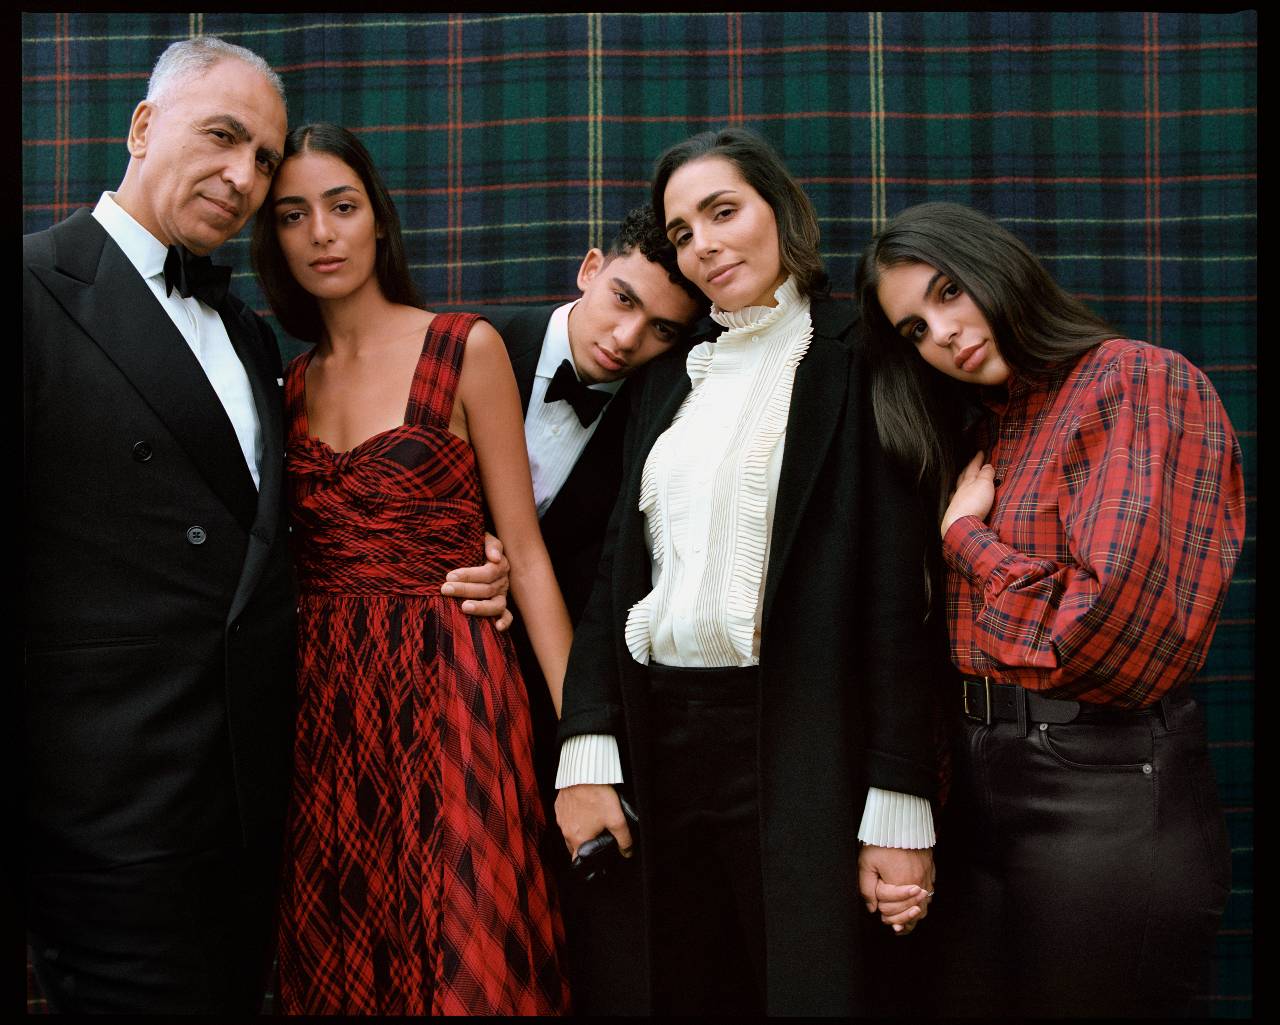 Ralph Lauren launches global holiday campaign to highlight the spirit of  togetherness - Lifestyle News